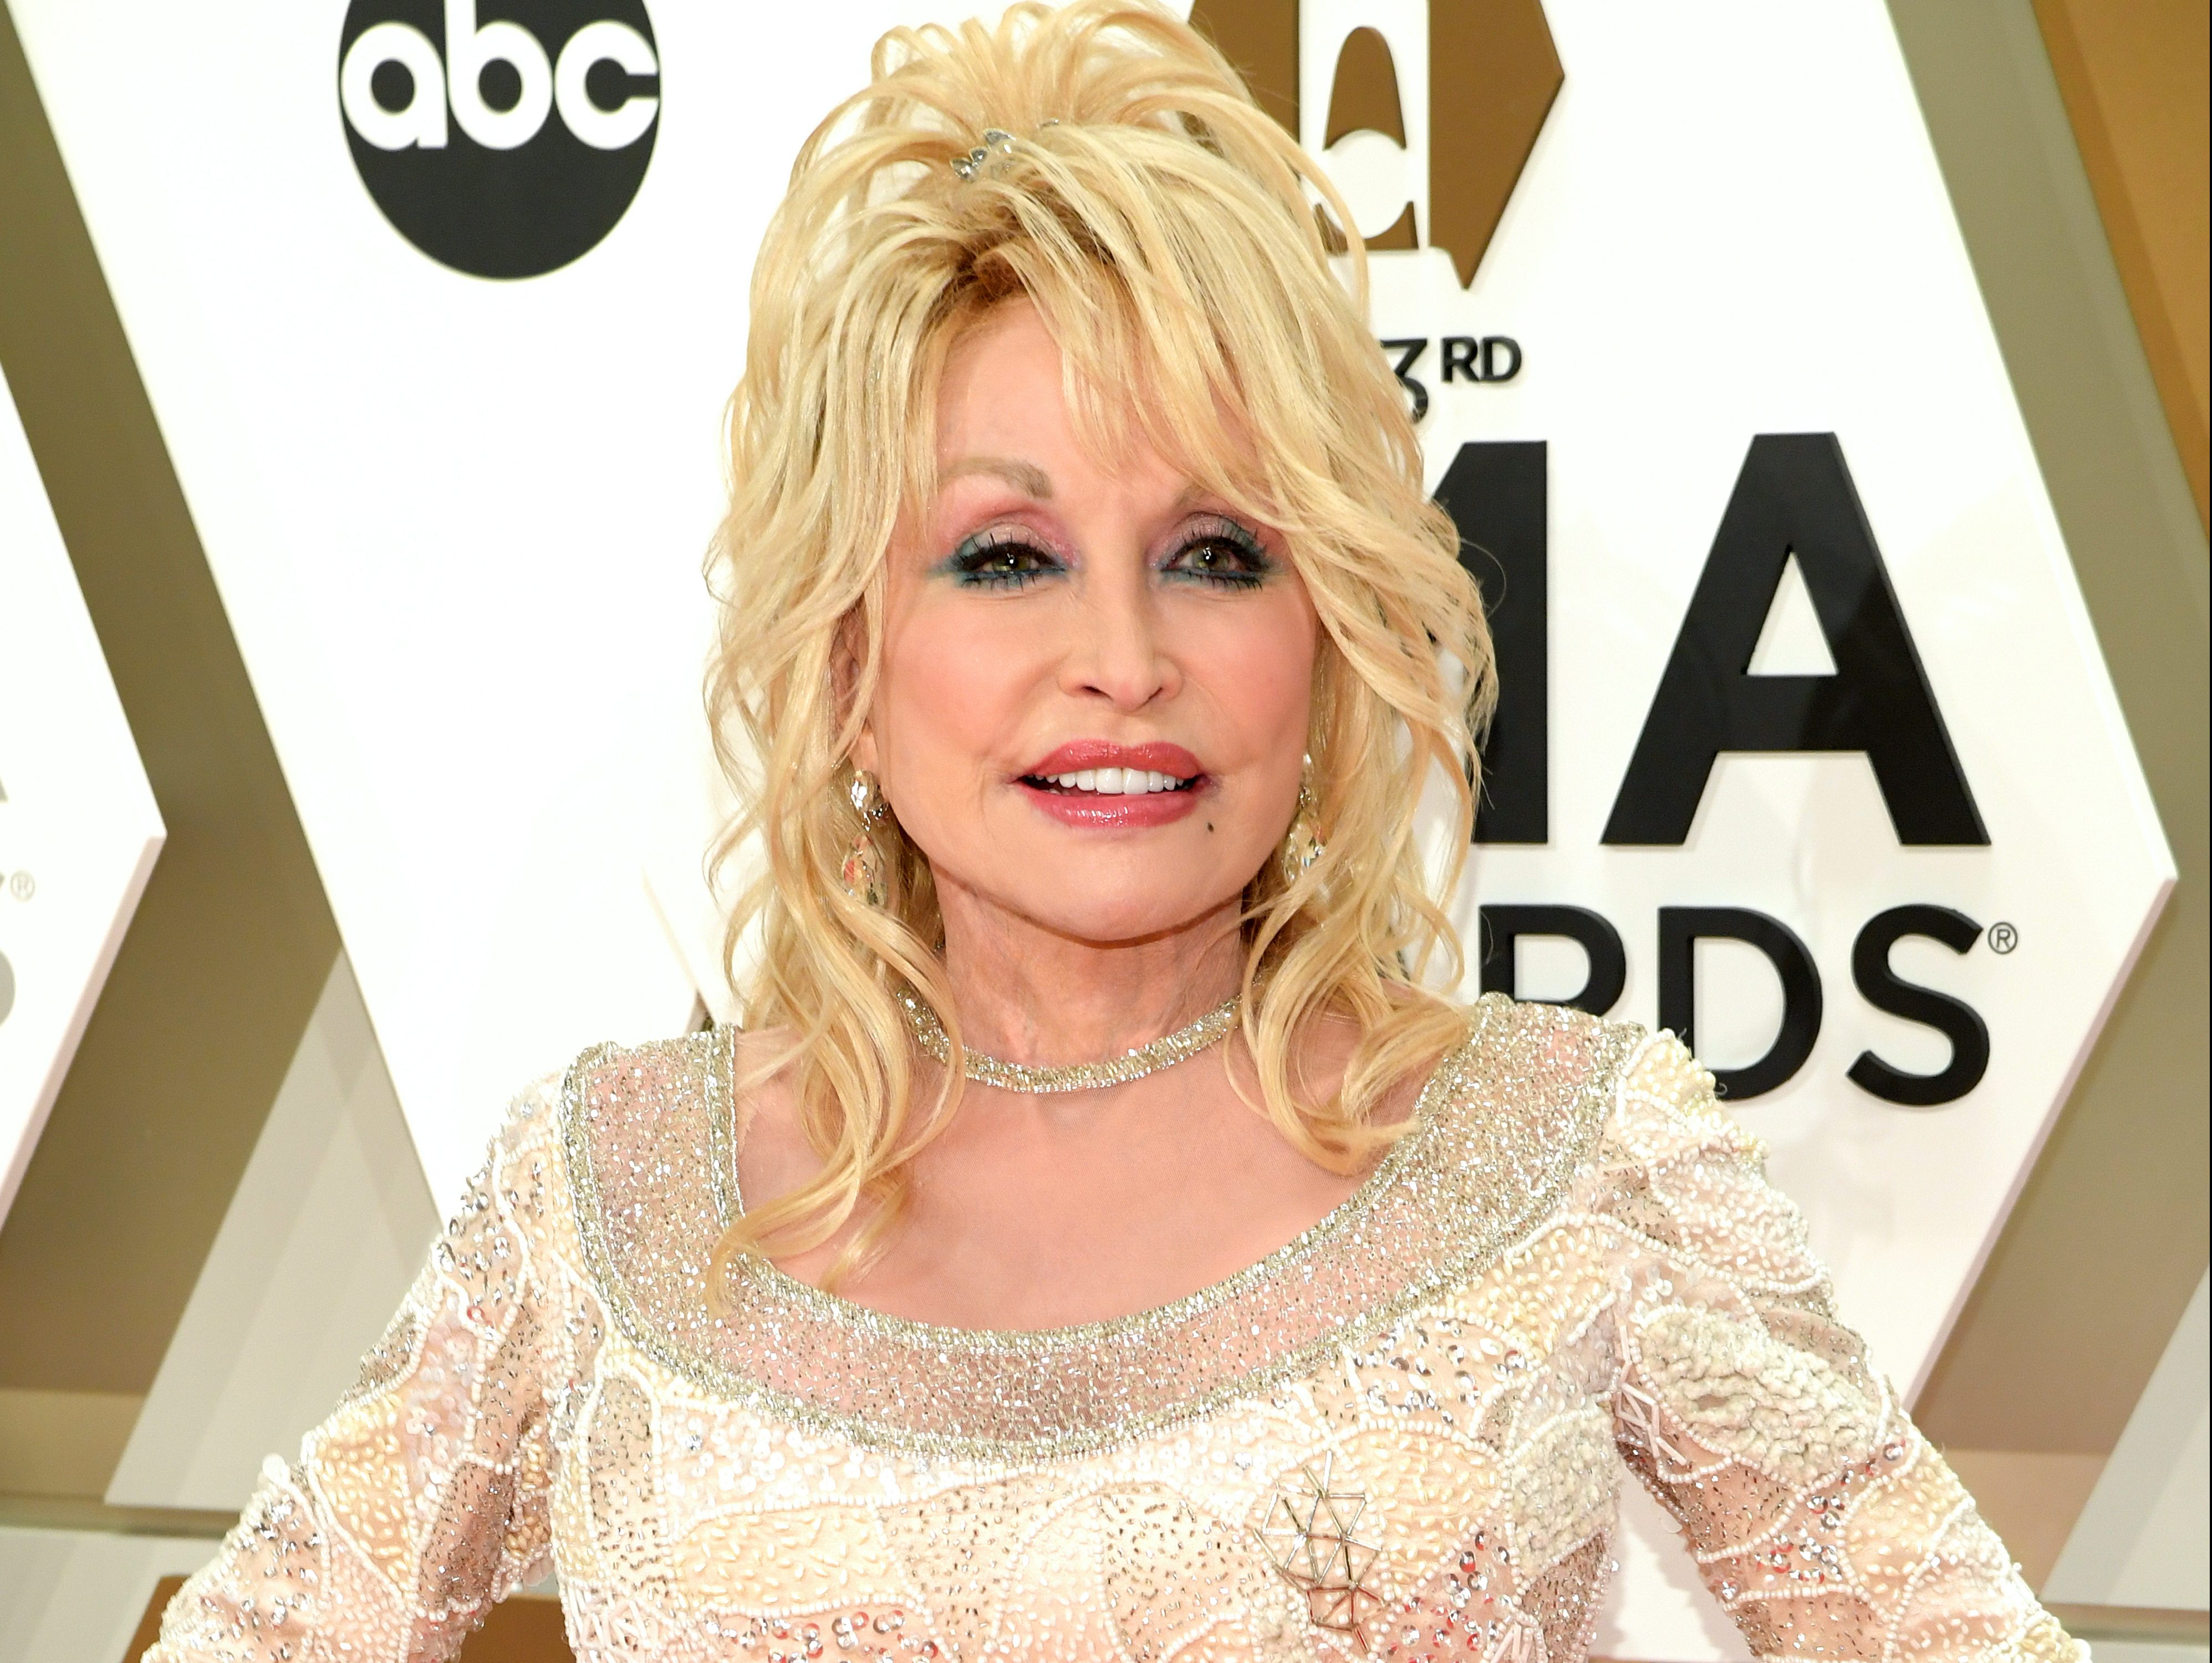 WORKING OVERTIME: Dolly Parton creating music for release